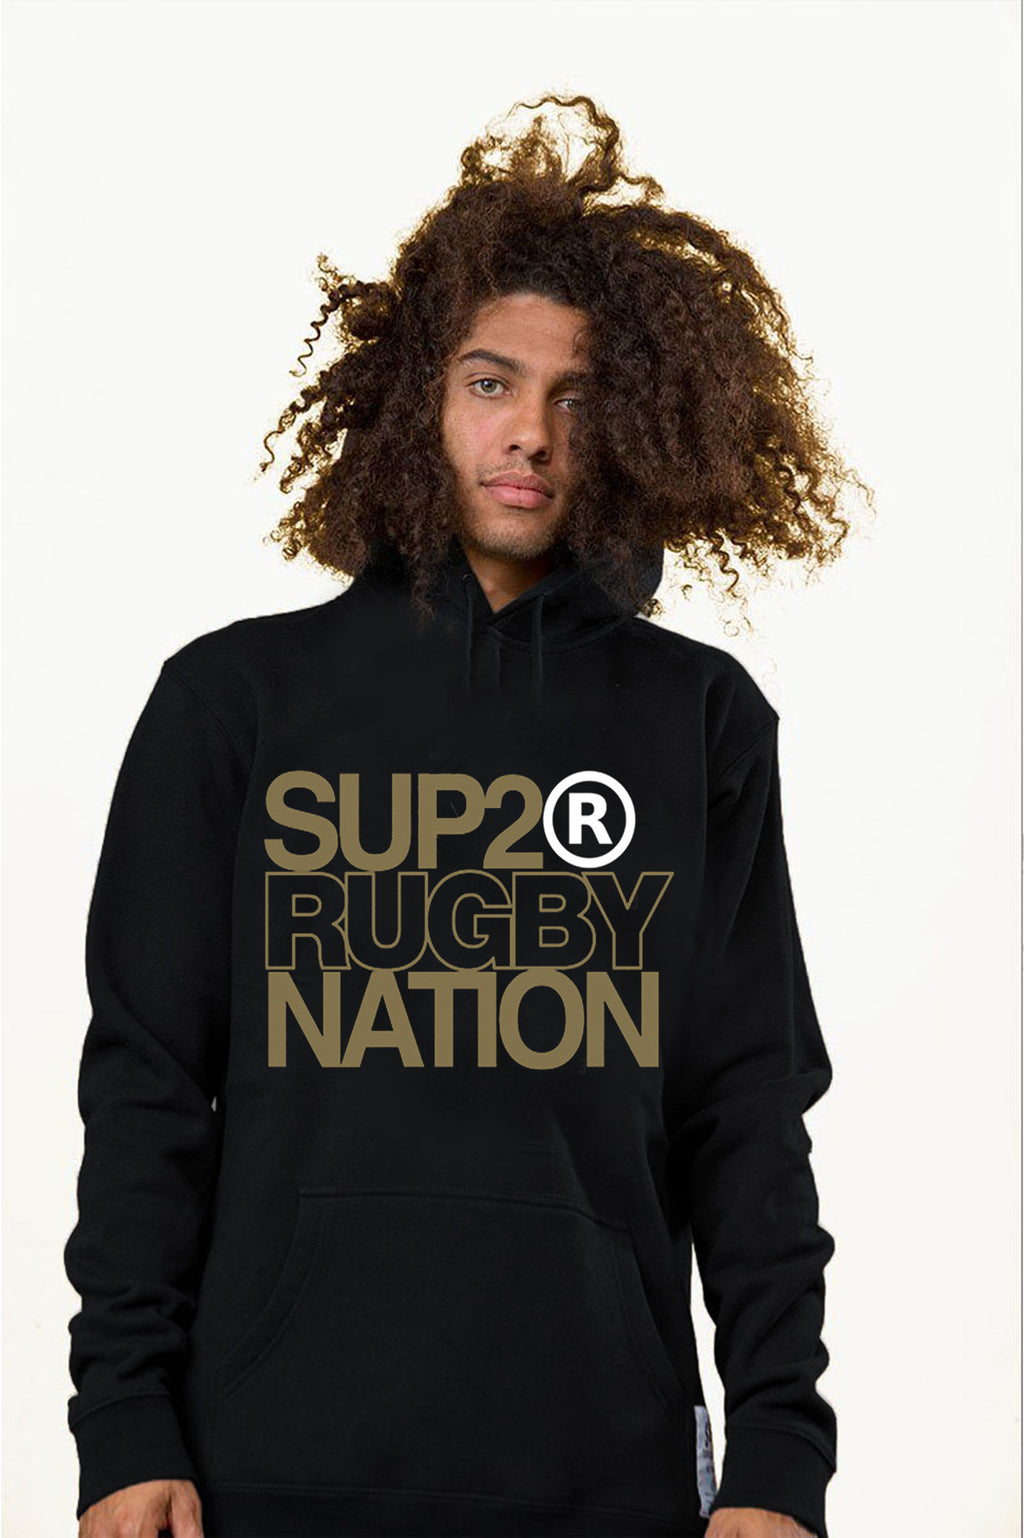 SUP2 Rugby Nation New Zealand Hoodies